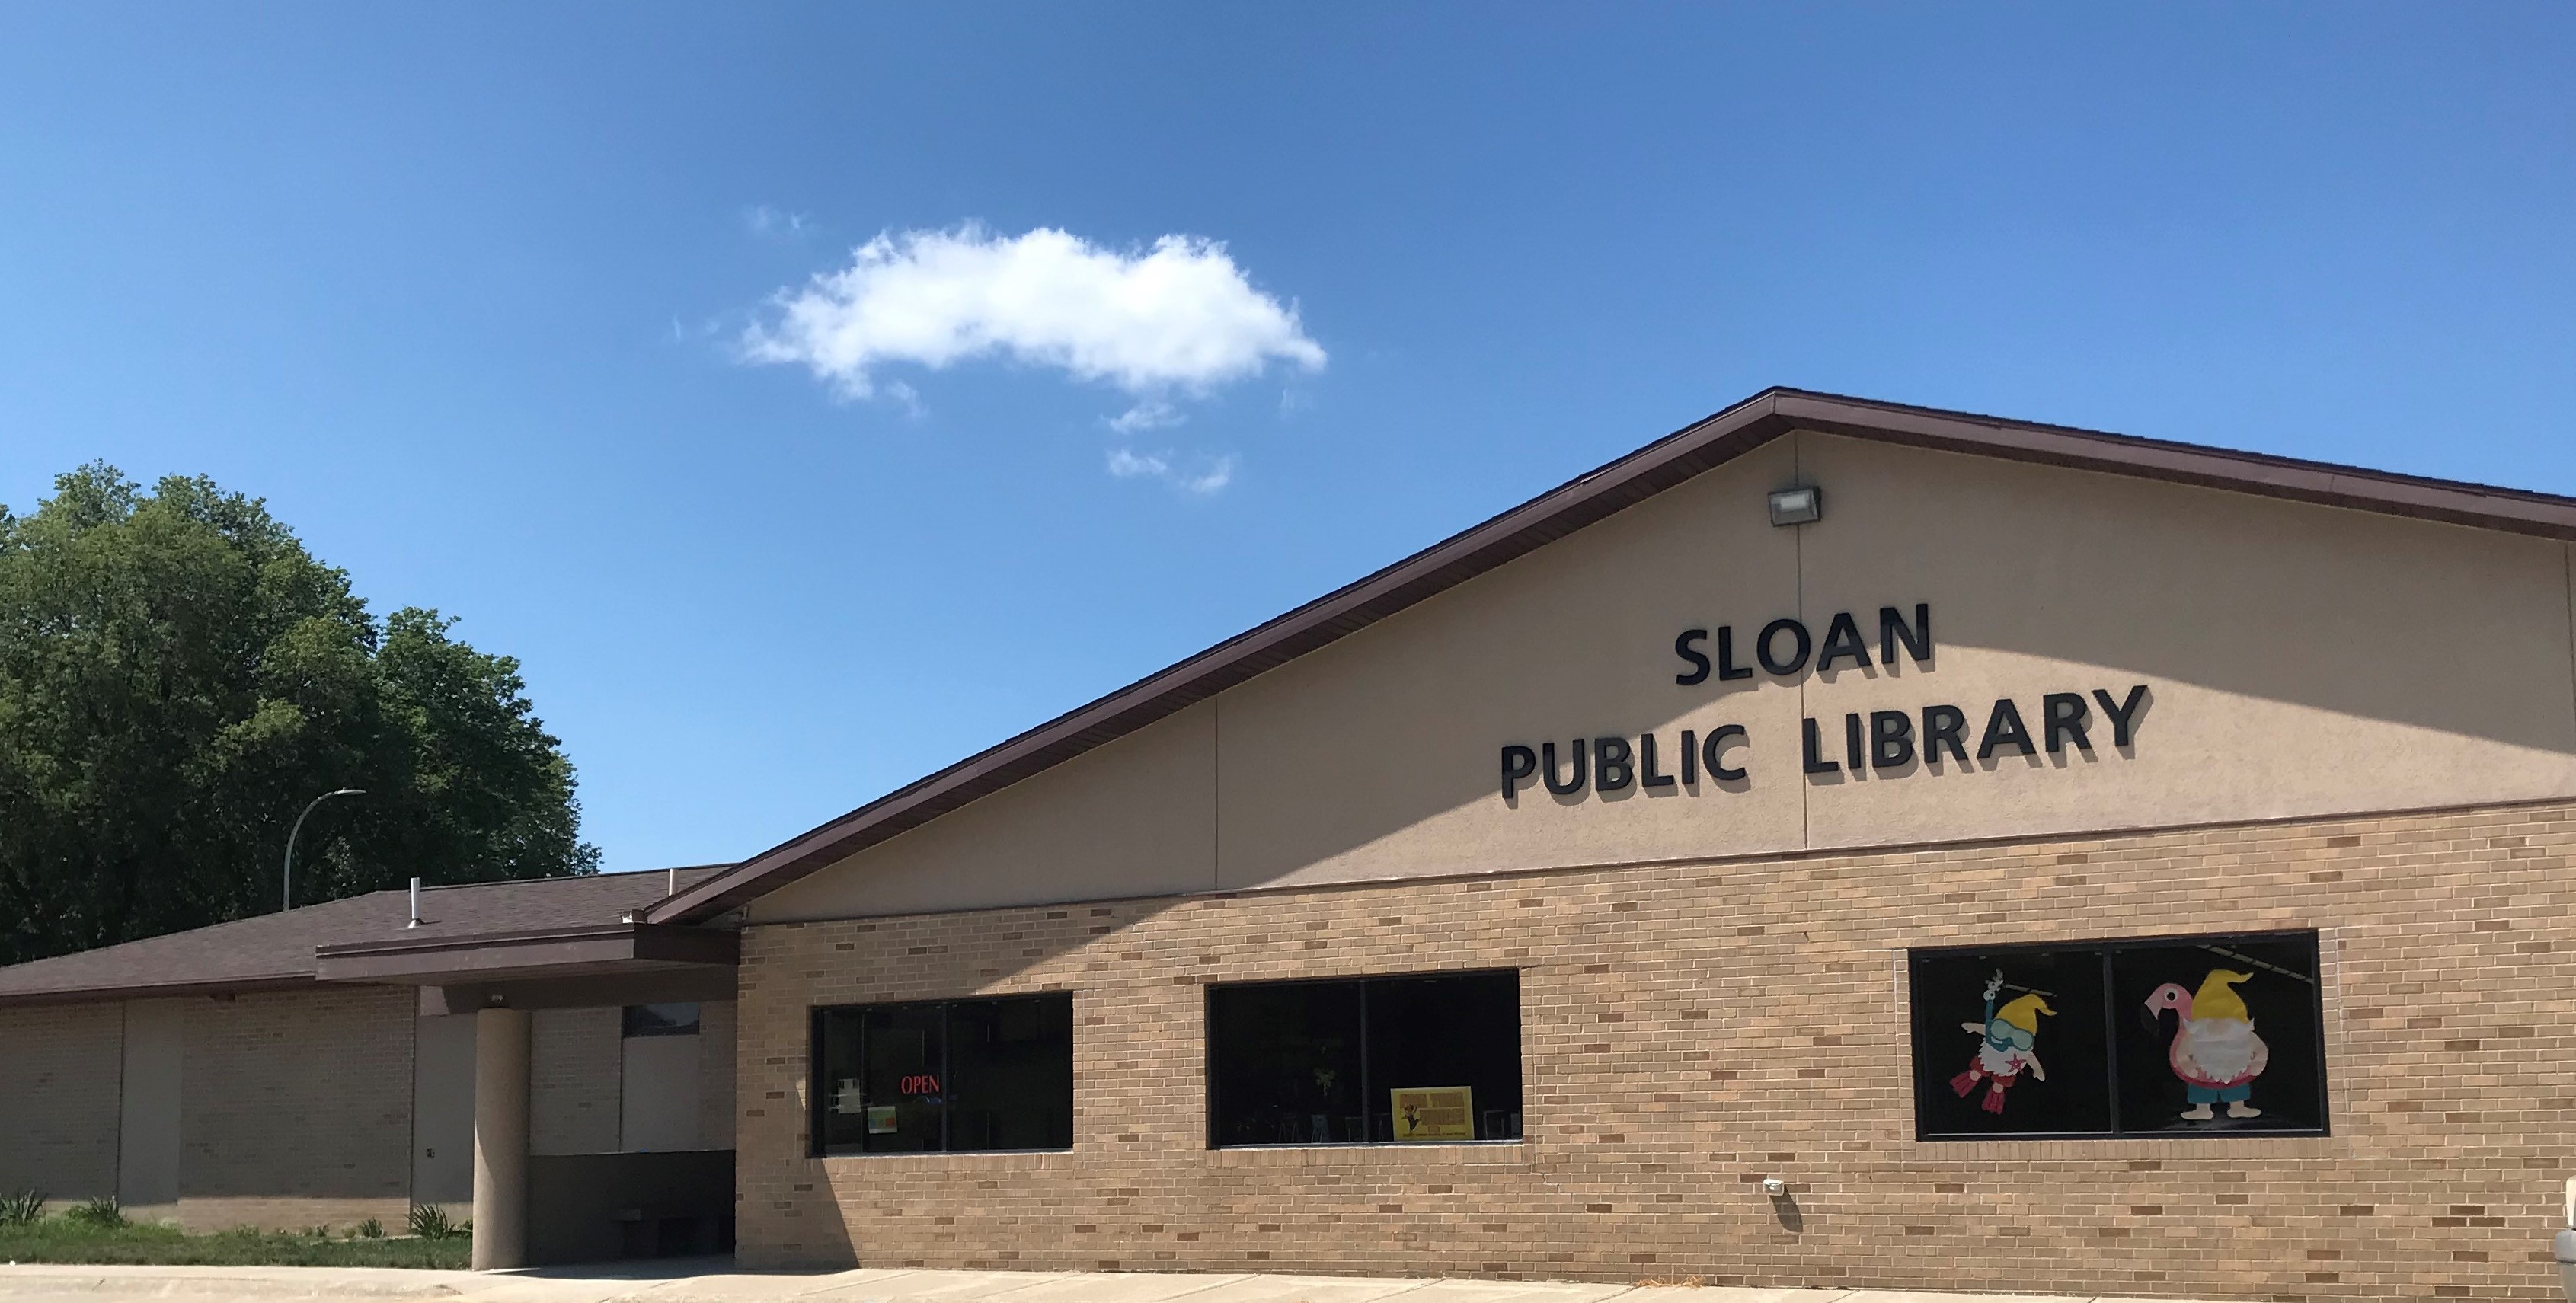 Sloan Public Library is Tier 3 Accredited by the State Library of Iowa